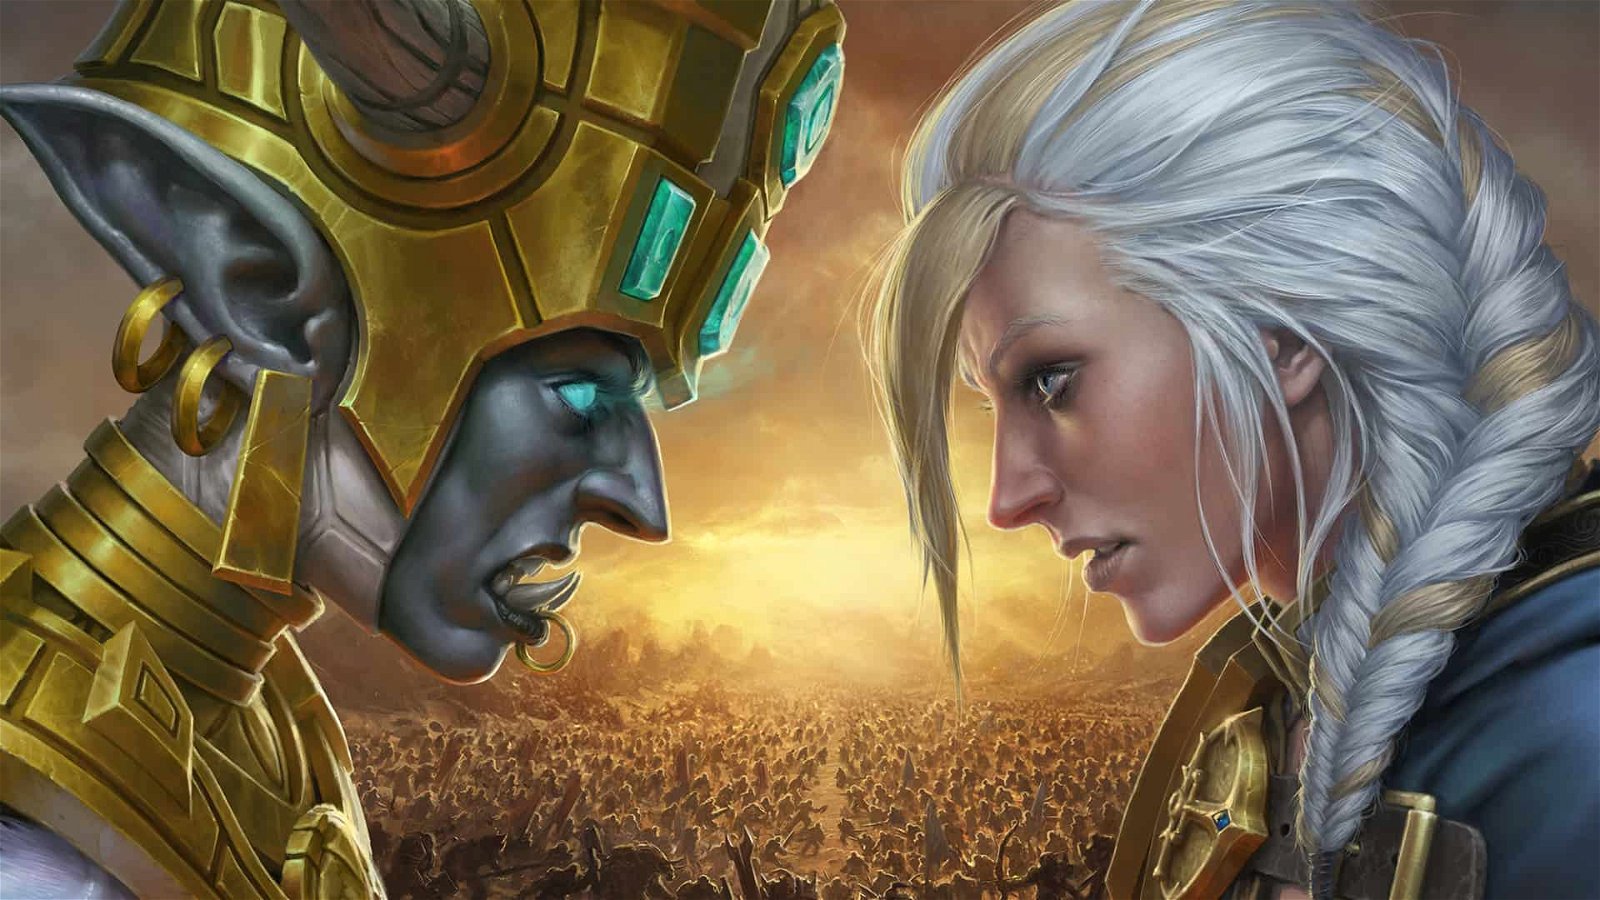 World of Warcraft: Battle for Azeroth Goes Live With New Unlocks and Expeditions